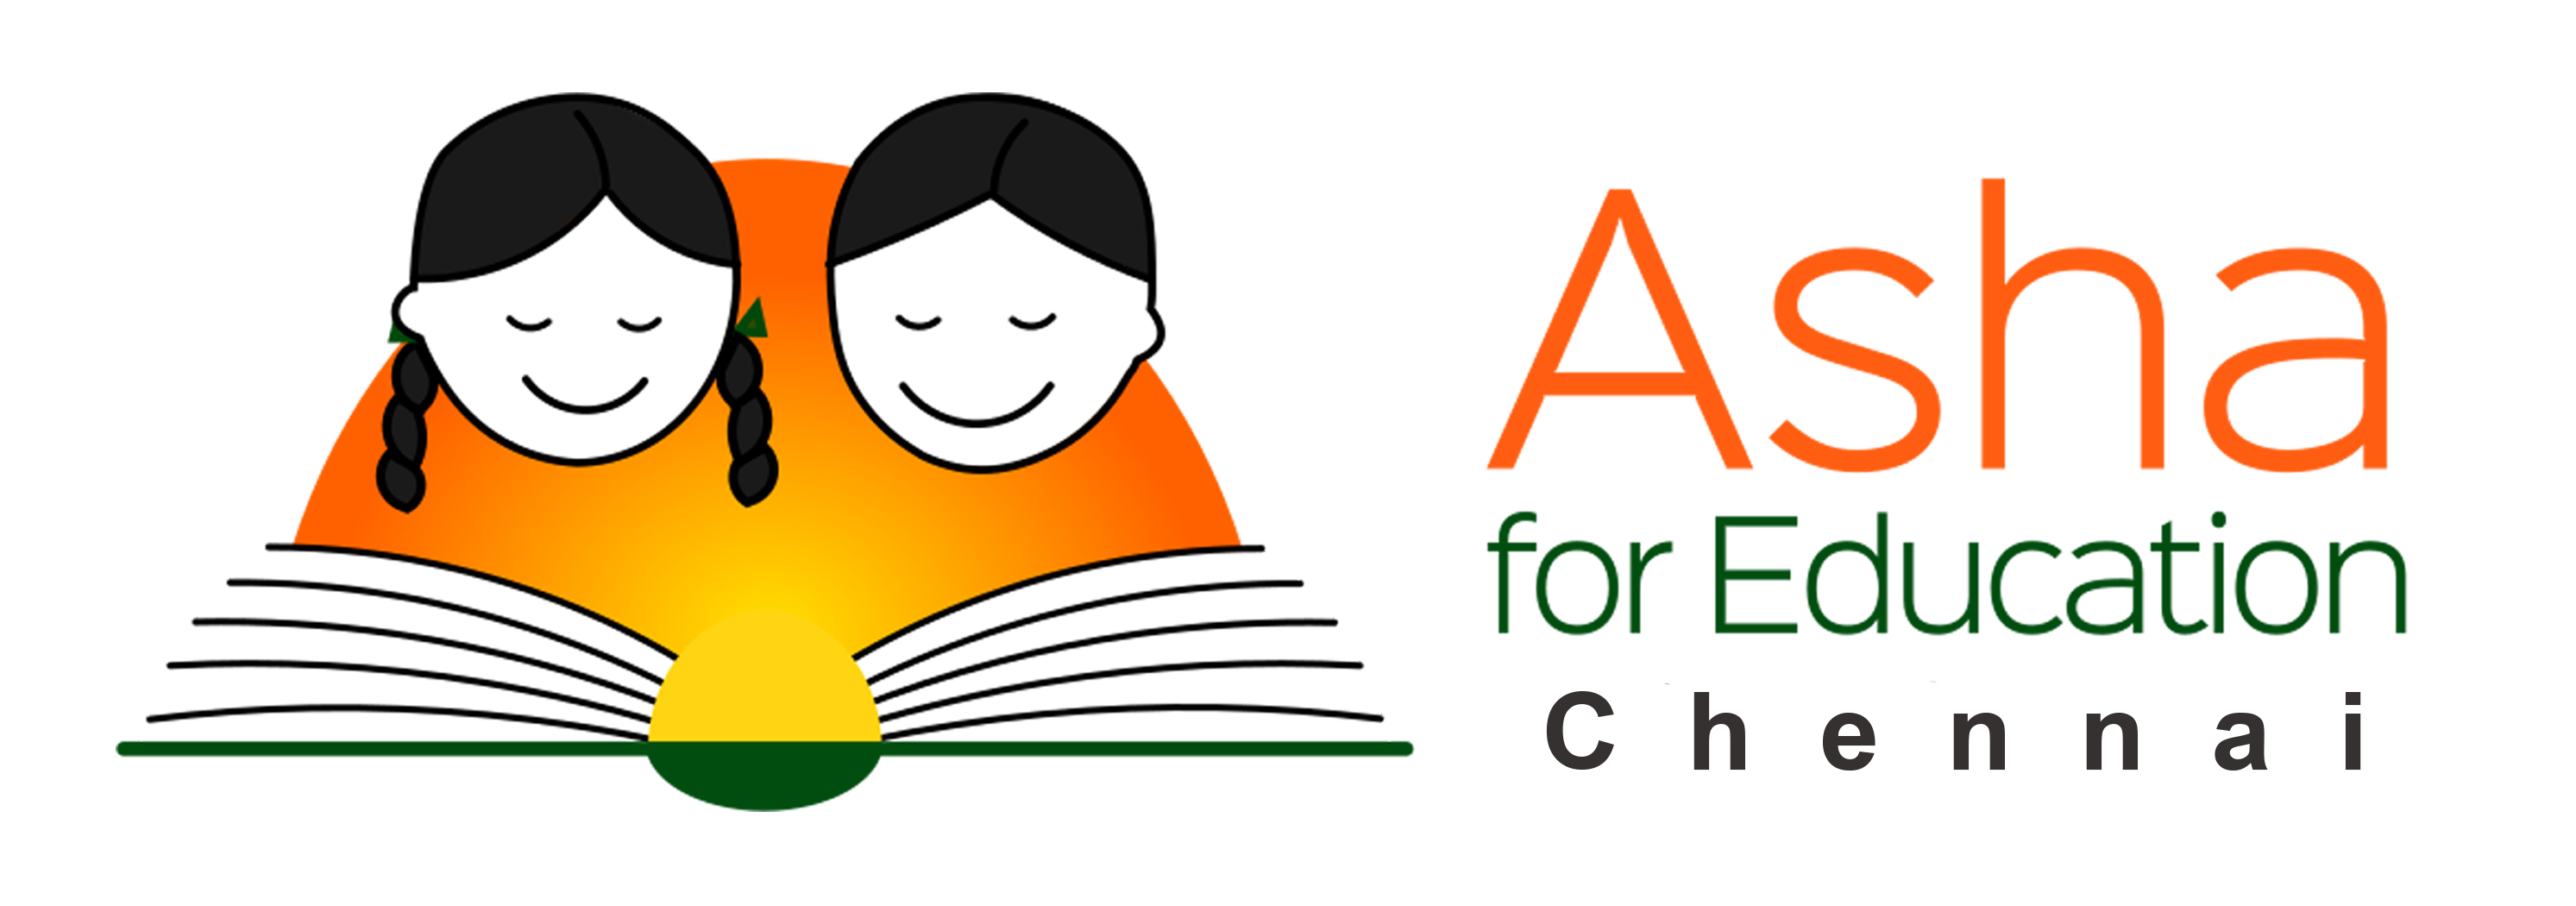 The Chennai chapter of Asha for Education